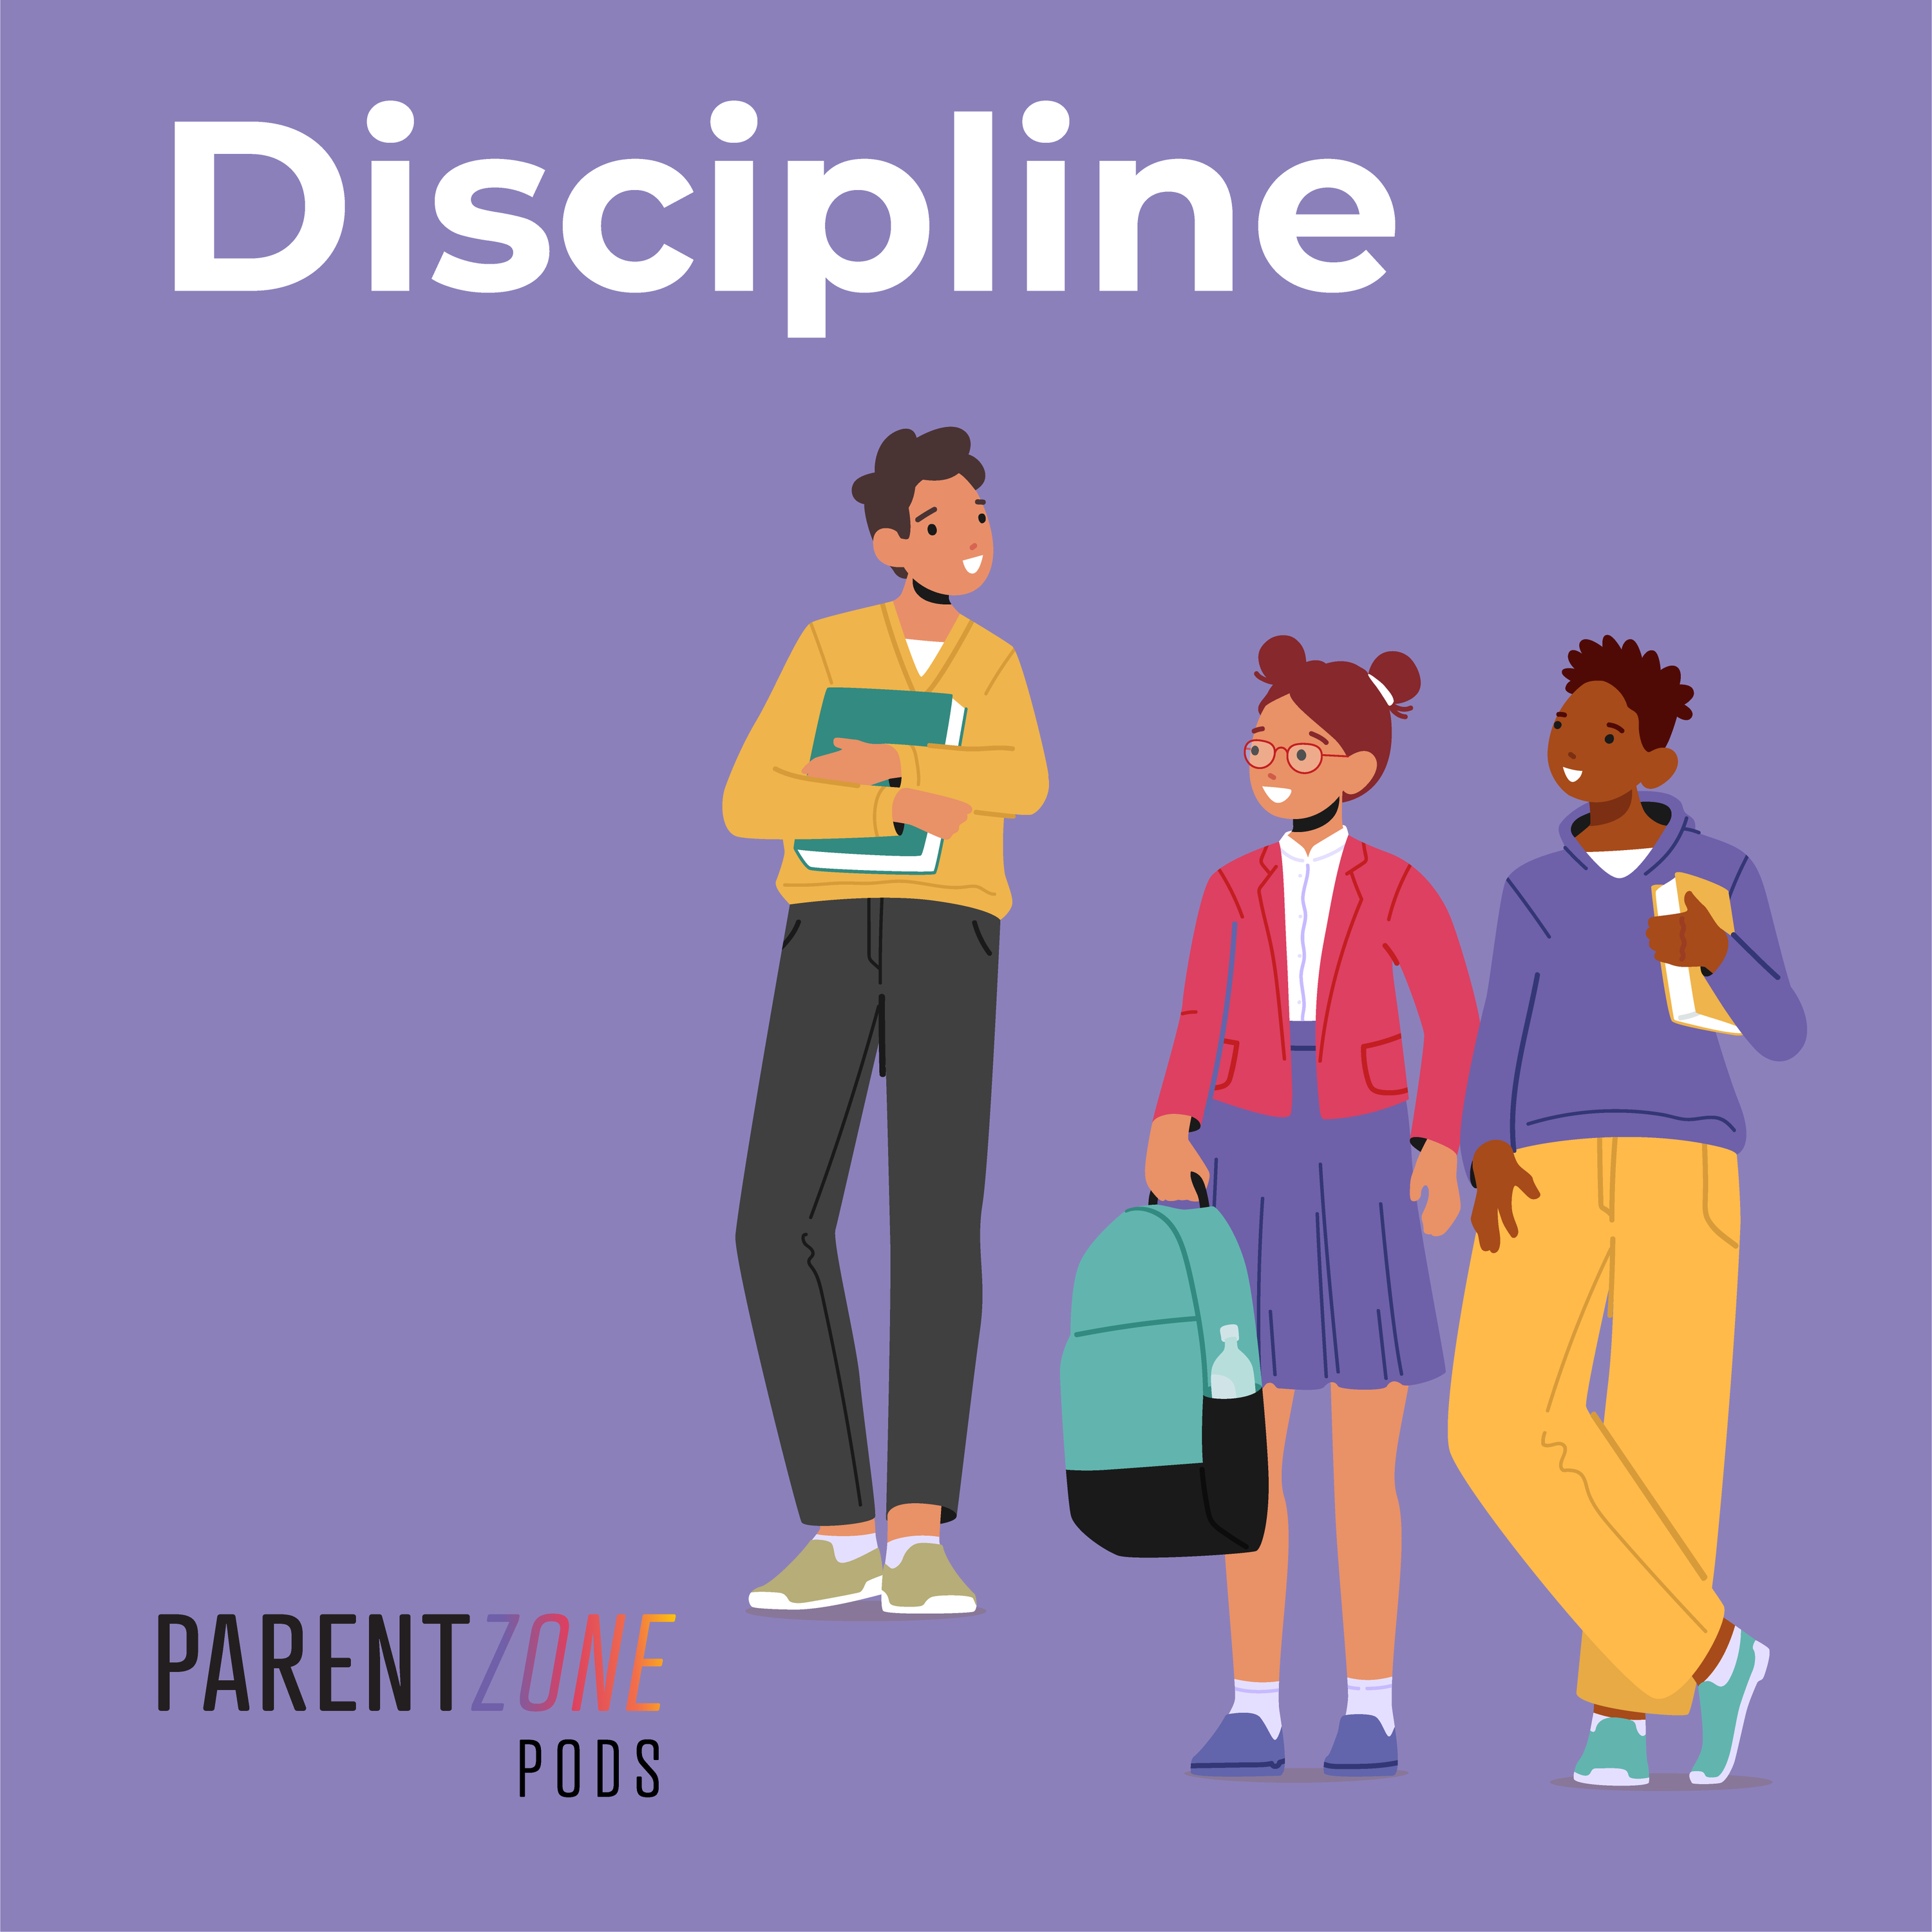 ANGLICARE VICTORIA - POSITIVE DISCIPLINE IN OUR FAMILIES EP 1